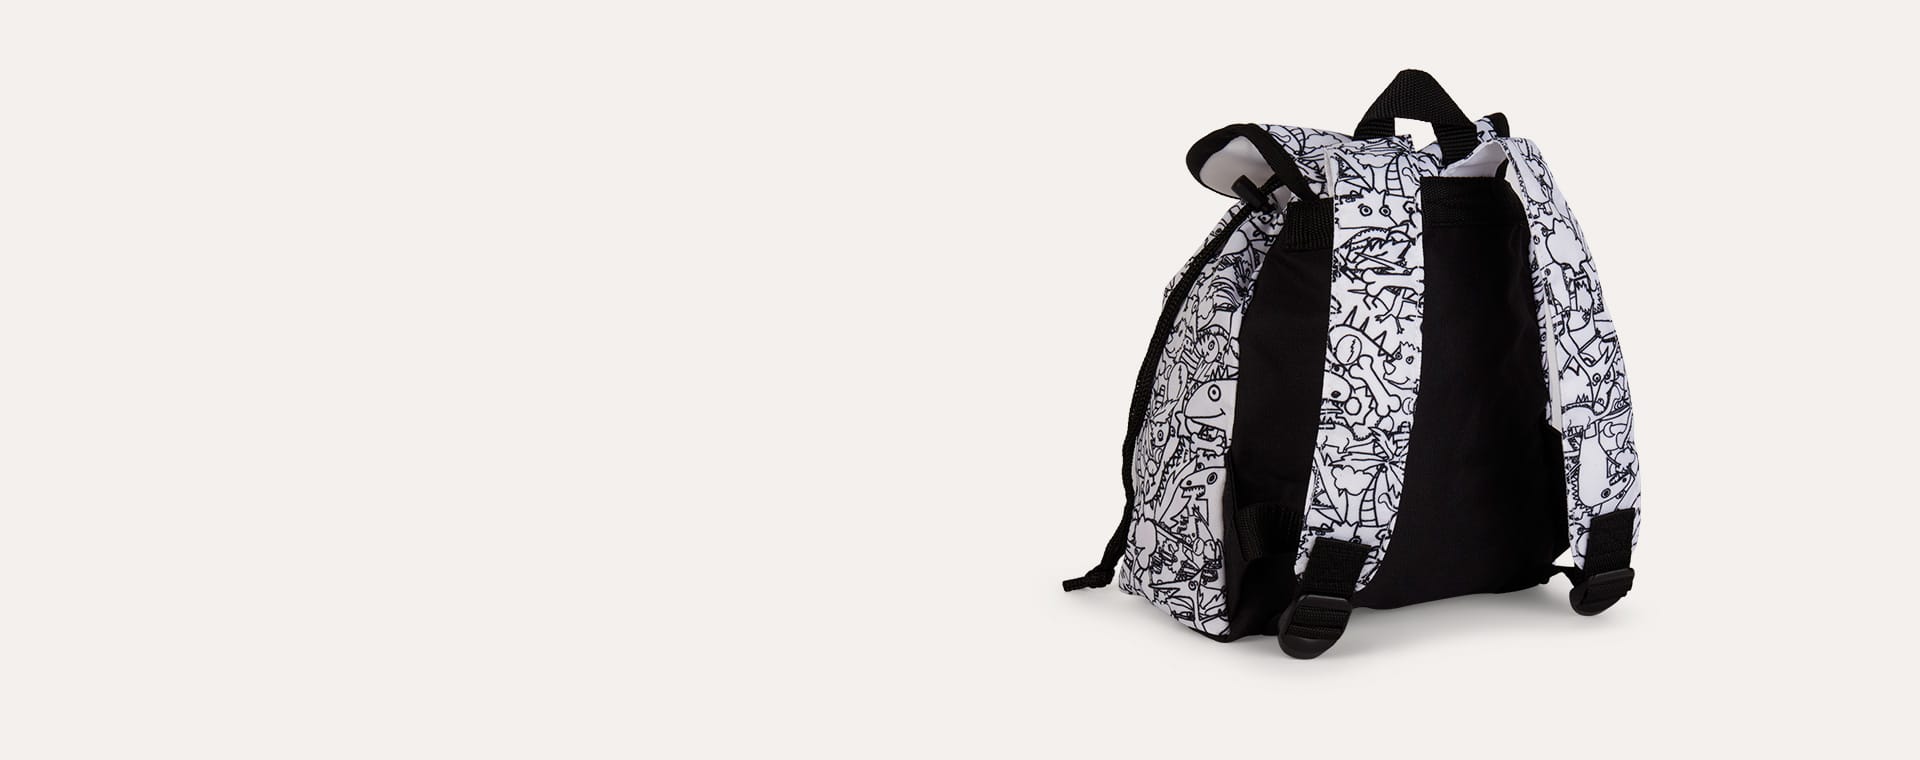 Dino Babymel Zip and Zoe Colour and Wash Backpack